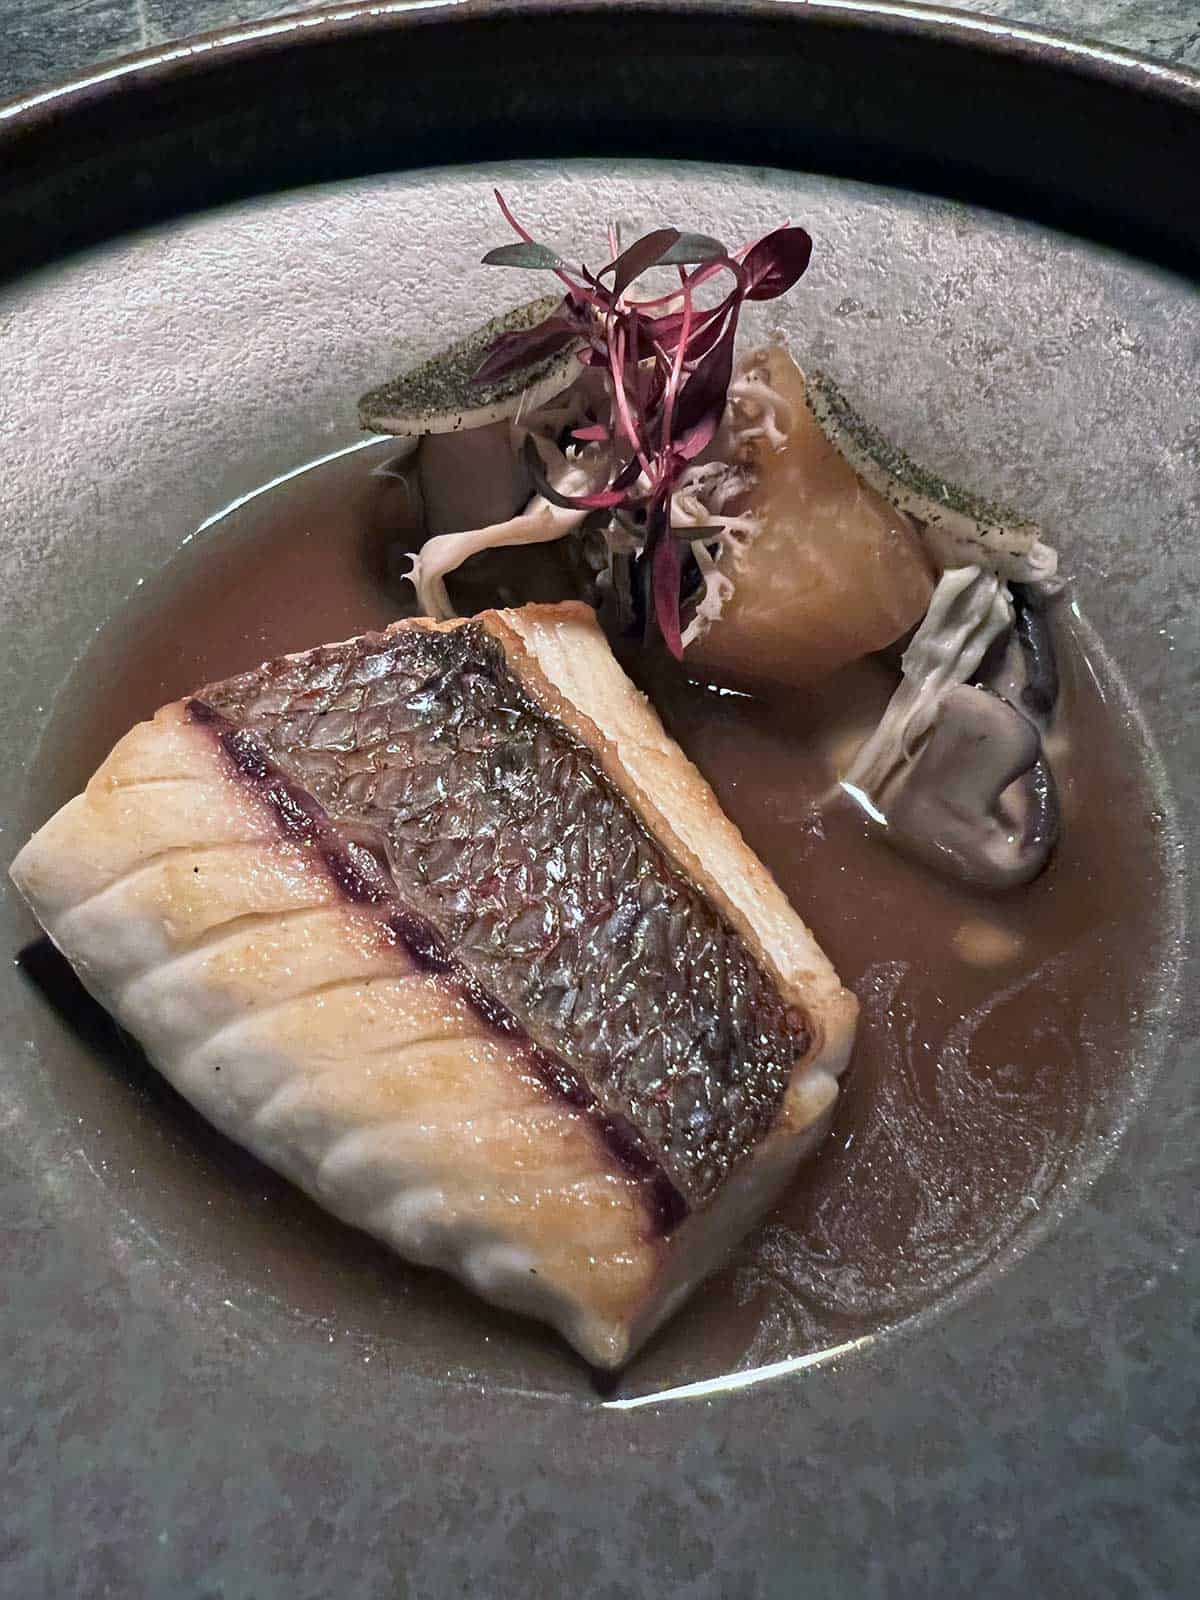 Seared fillet of tauwhiro fish and broth.